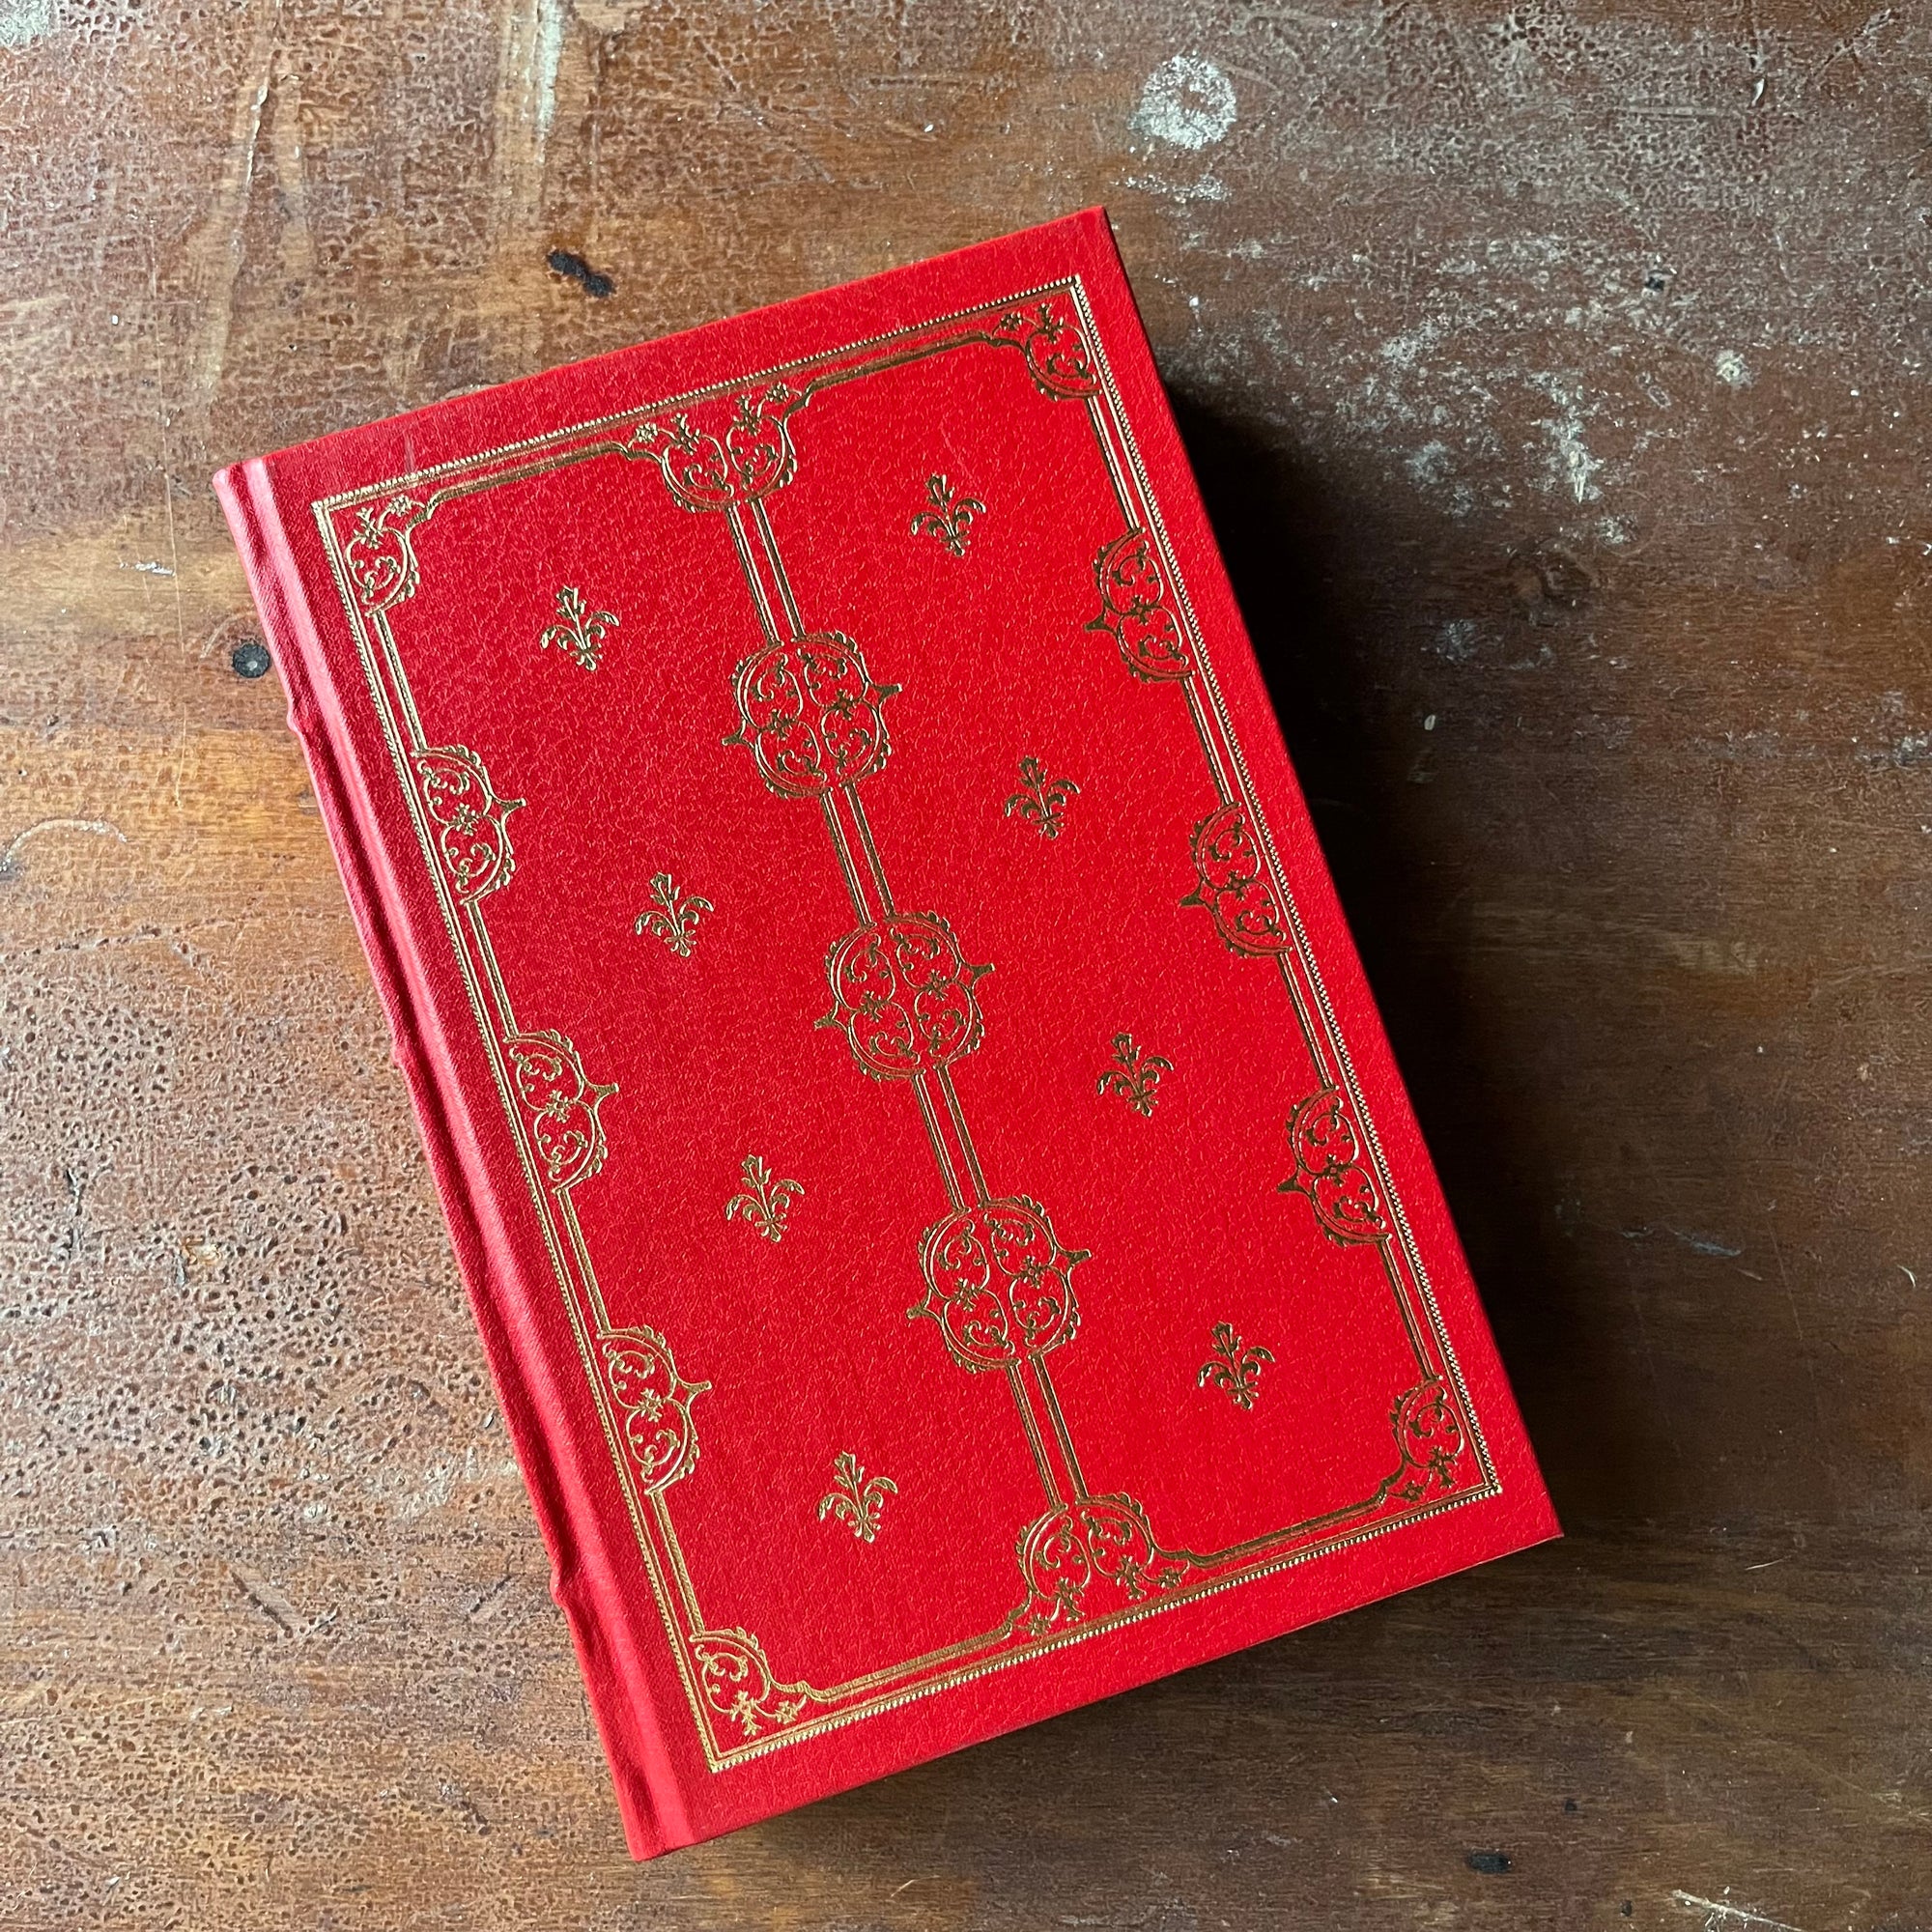 Pride and Prejudice by Jane Austen-1980 The Franklin Library Edition-vintage classic literature-collector's edition-view of the embossed front cover in red with gold design